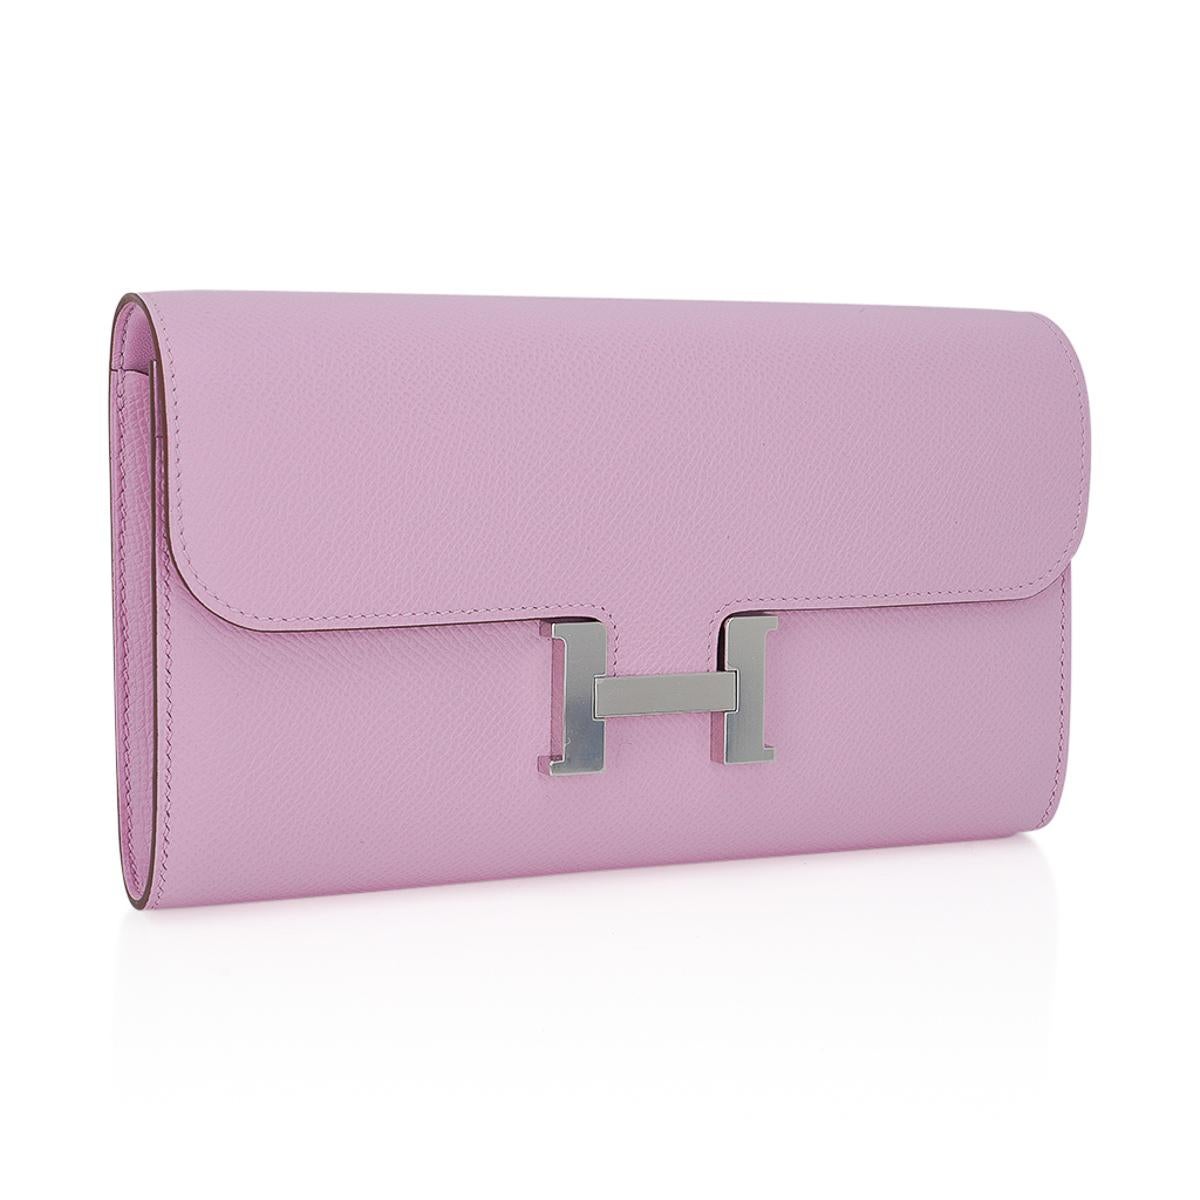 Mightychic offers a coveted Hermes Constance Long To Go wallet featured in Mauve Sylvestre with Palladium hardware.
Rich in Epsom leather.
The consummate 'Wallet on a Chain'
Detachable strap allows you to carry the wallet/bag as a clutch.
Classic